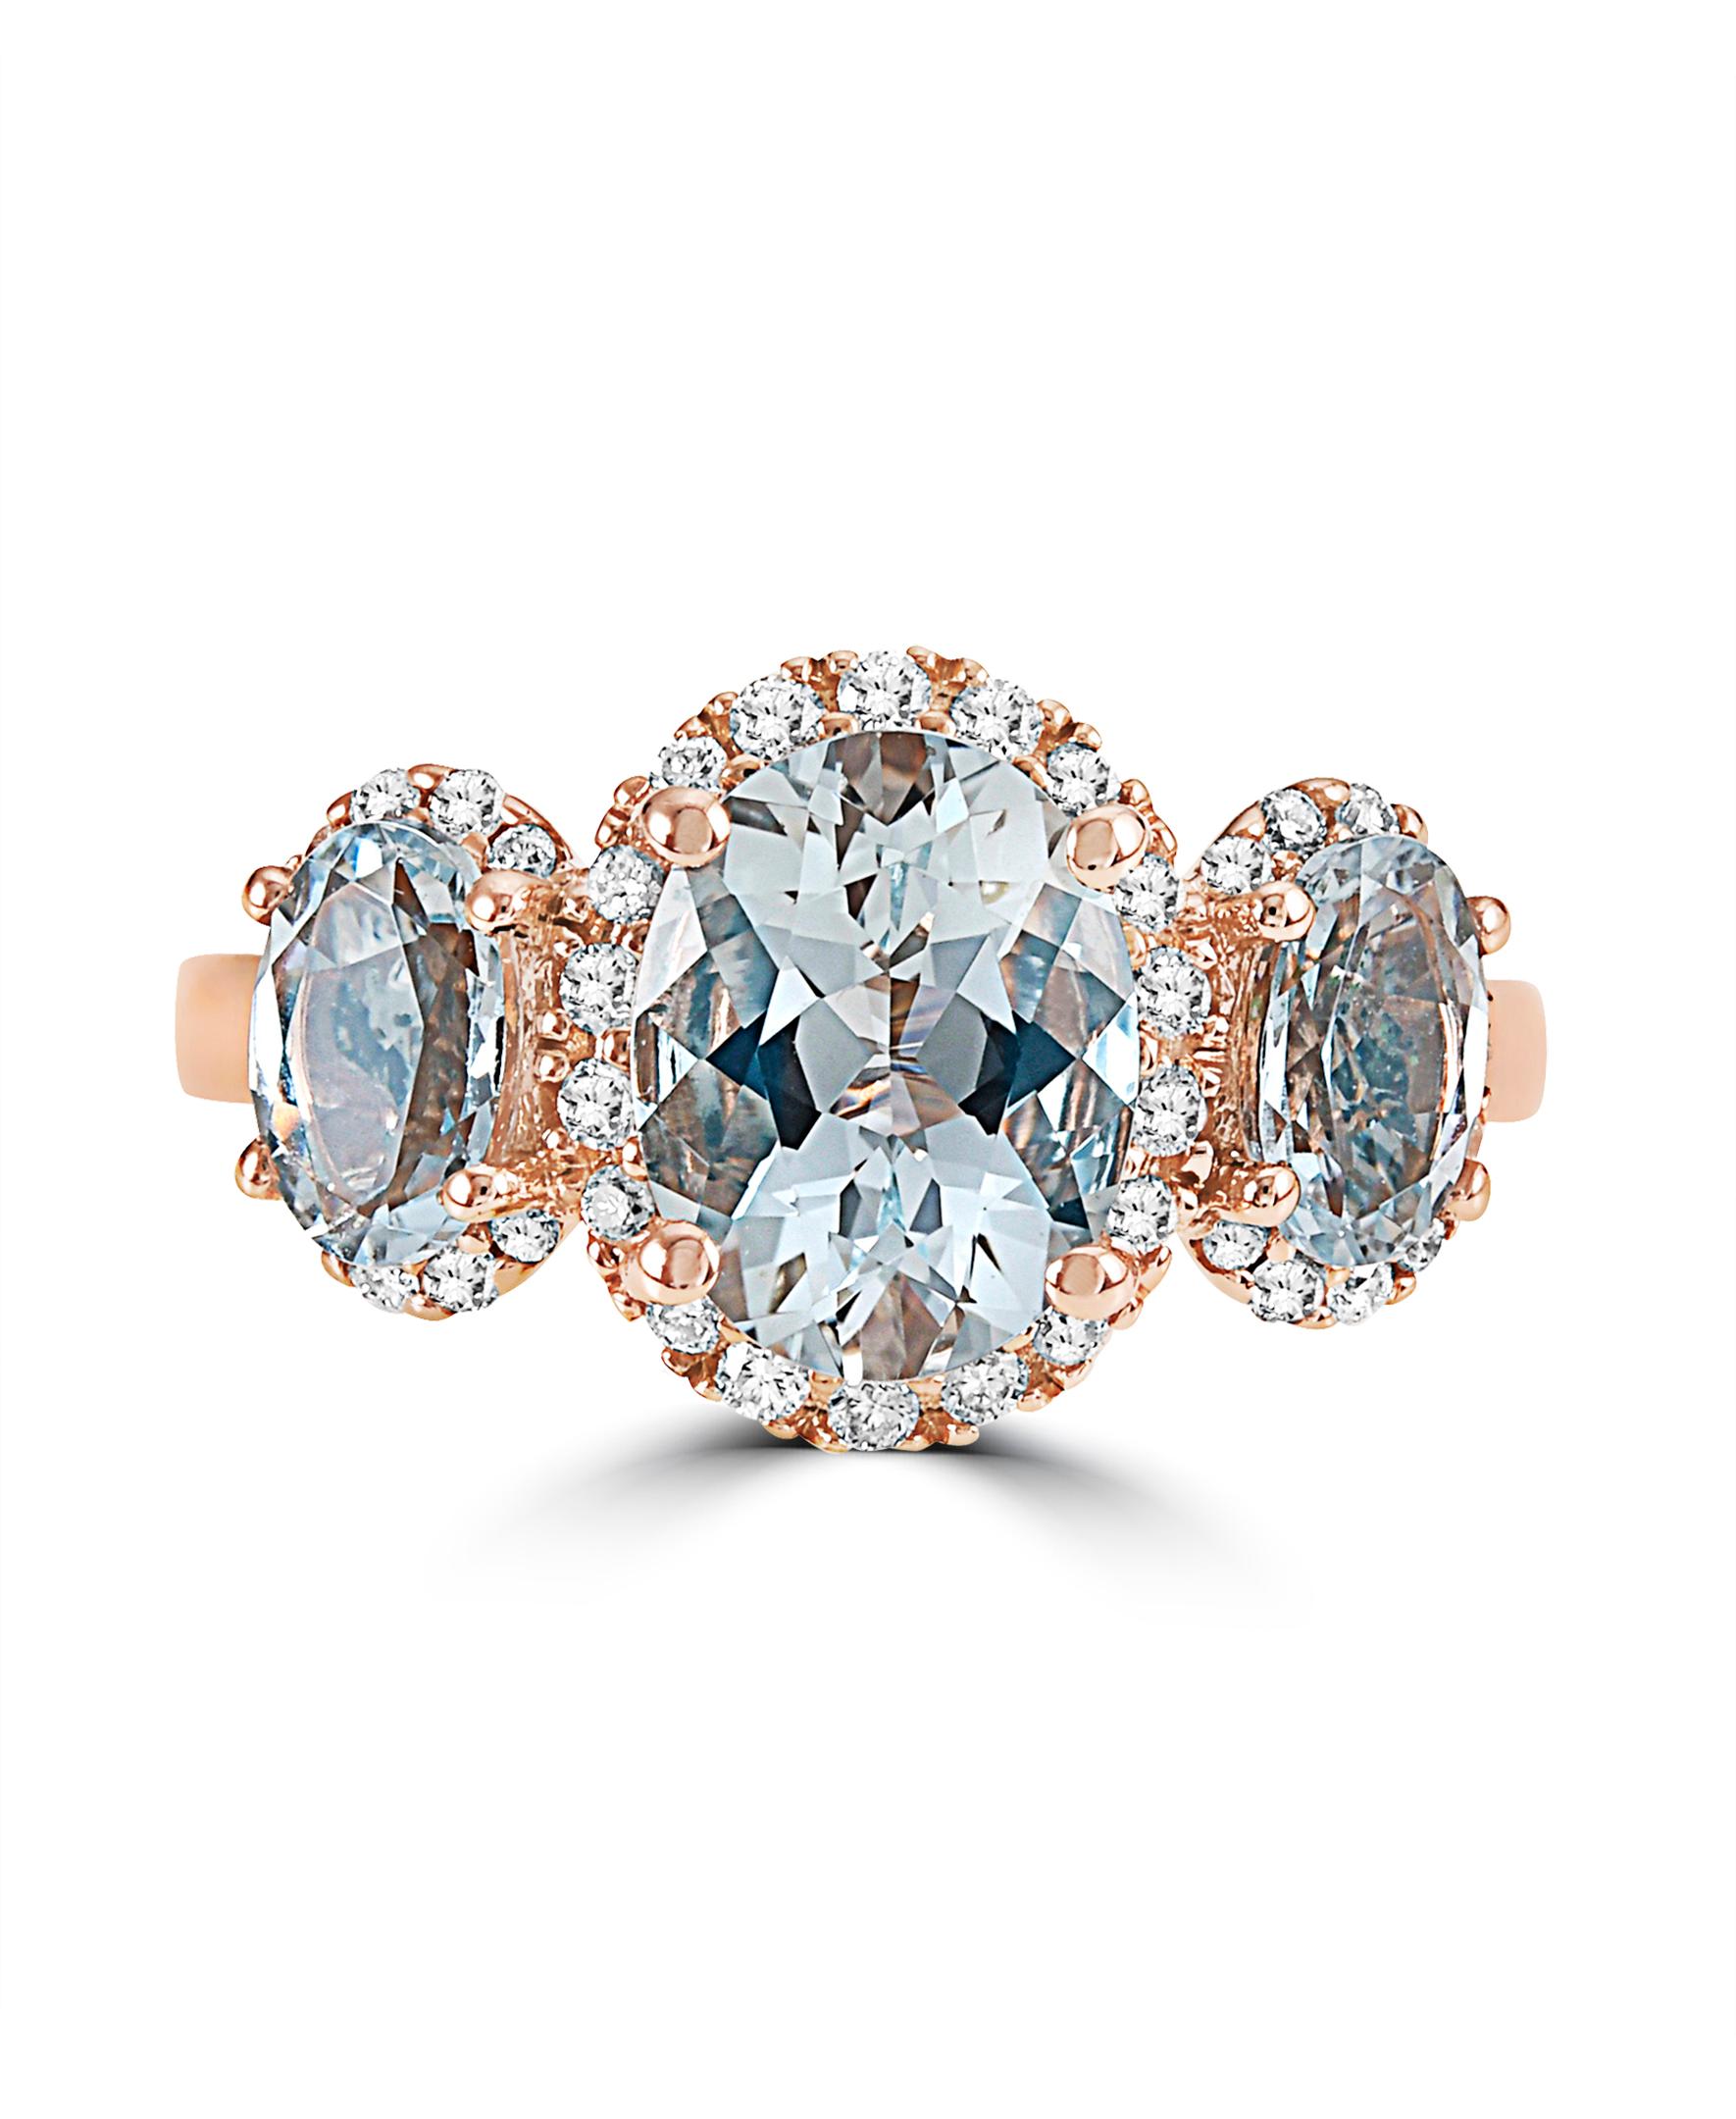 This Effy design ring is set in 14K rose gold. 
The three aquamarine stones are oval in shape and the weight is 2.65 ct.
The diamonds are round in shape and the total weight is 0.25 ct.
This ring is a sizable 7. 
The item number is R401.